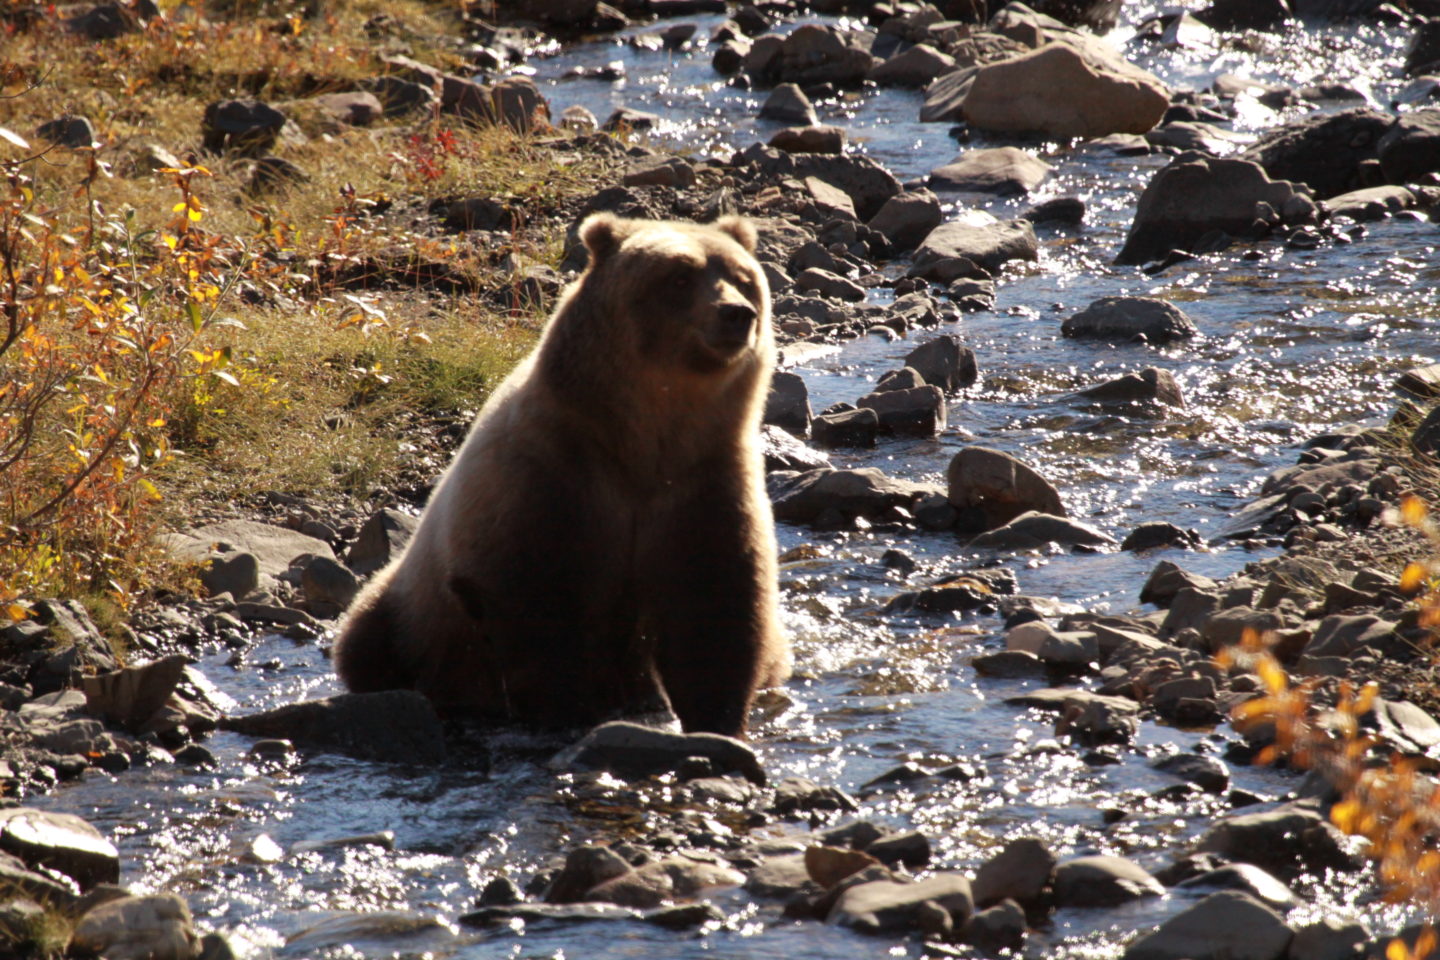 Bear in Mount Denali National Park during our Alaska Cruise with Princess Cruises